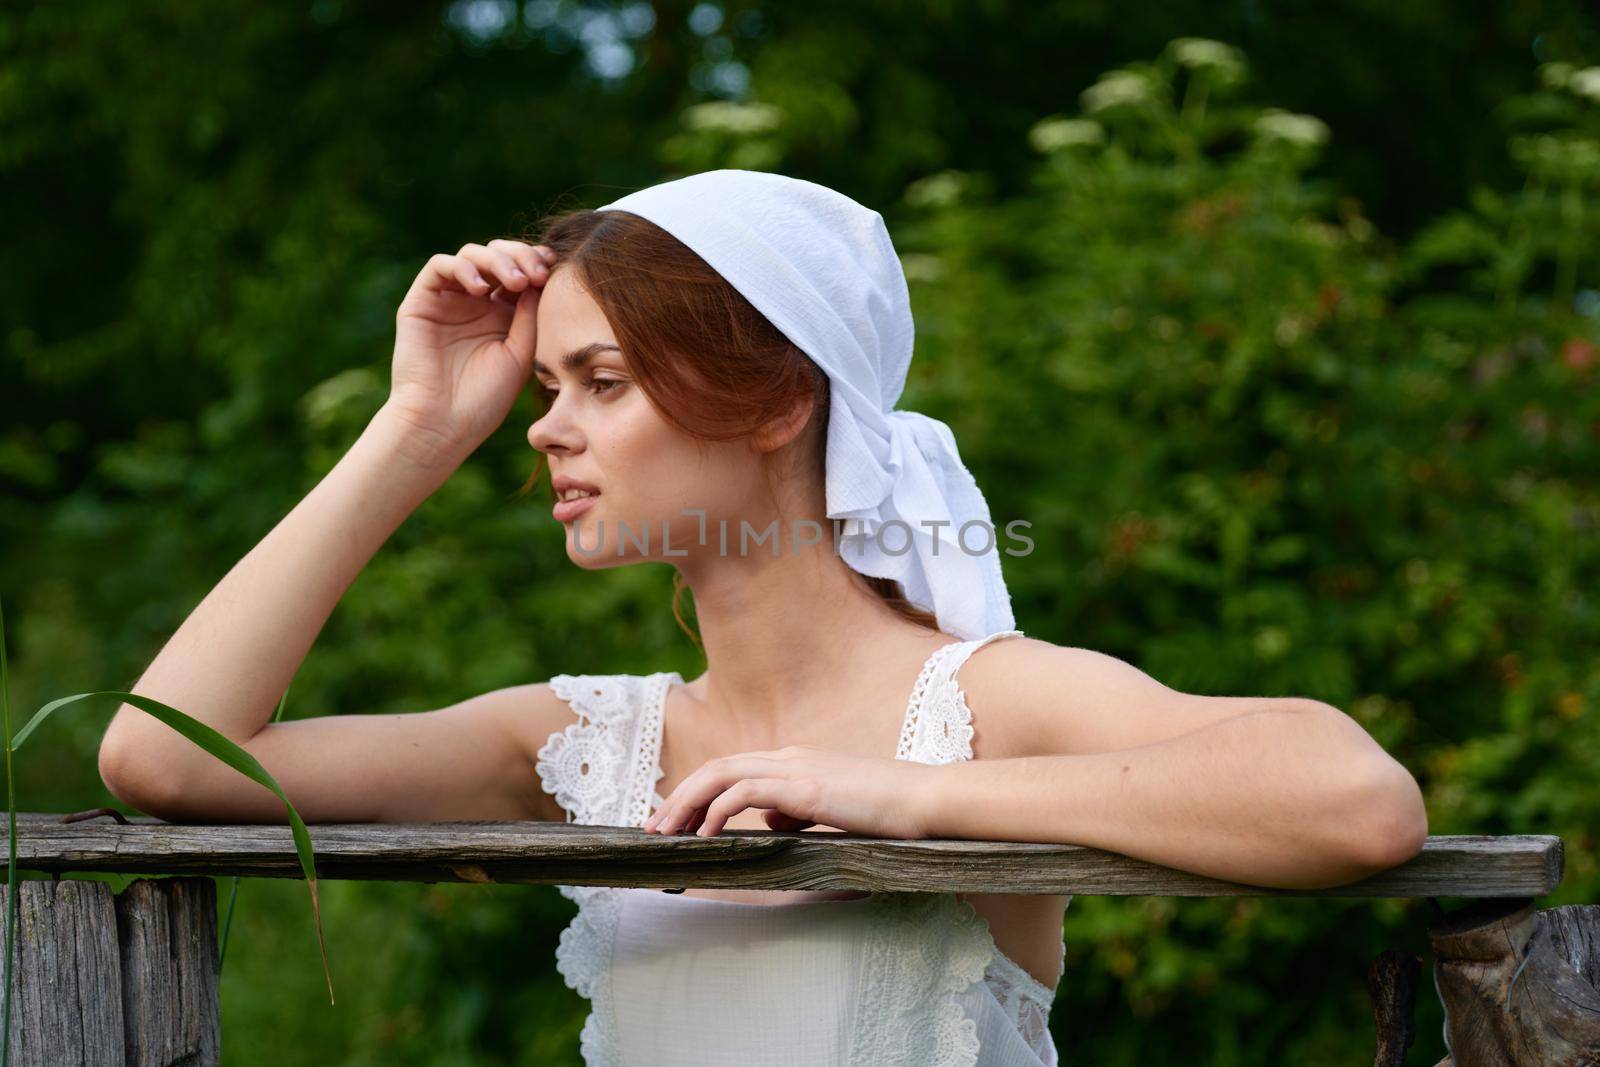 cheerful woman outdoors in the garden countryside ecology nature. High quality photo